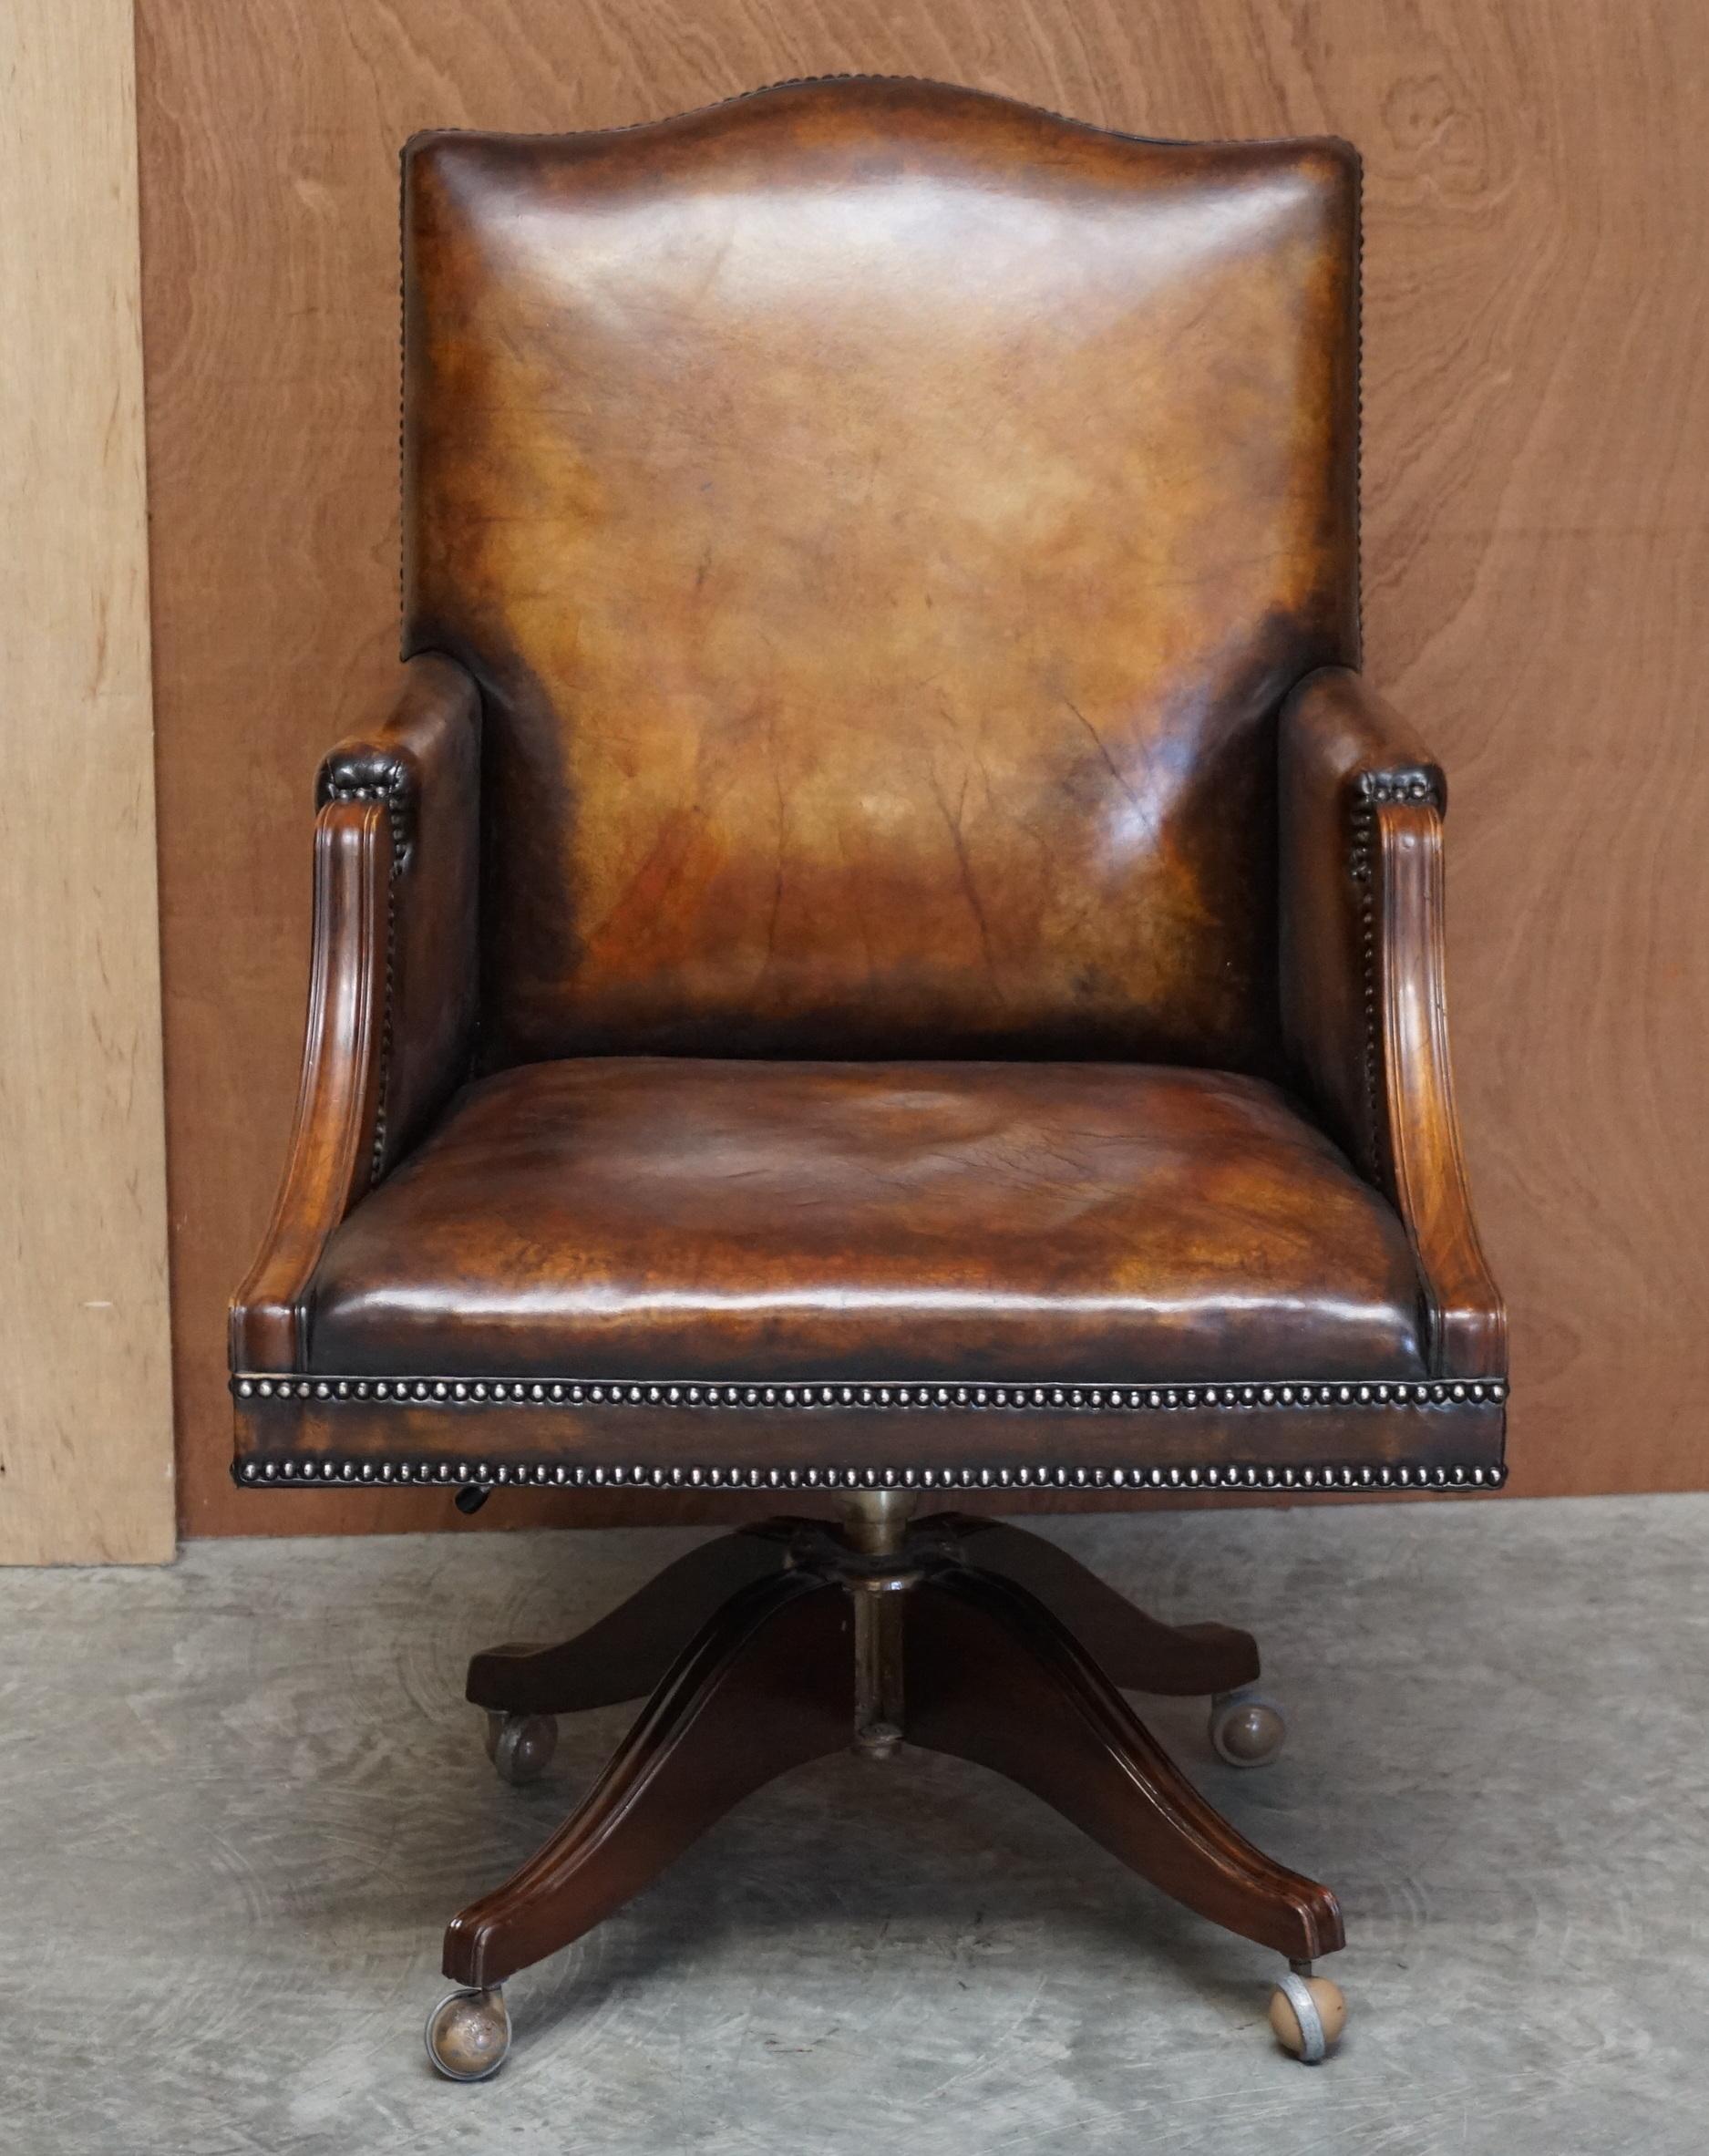 We are delighted to offer for sale this lovely fully restored original oak framed vintage hand dyed Whiskey brown leather directors chair.

A very good looking well made and comfortable directors chair, I've not seen one with a solid oak frame